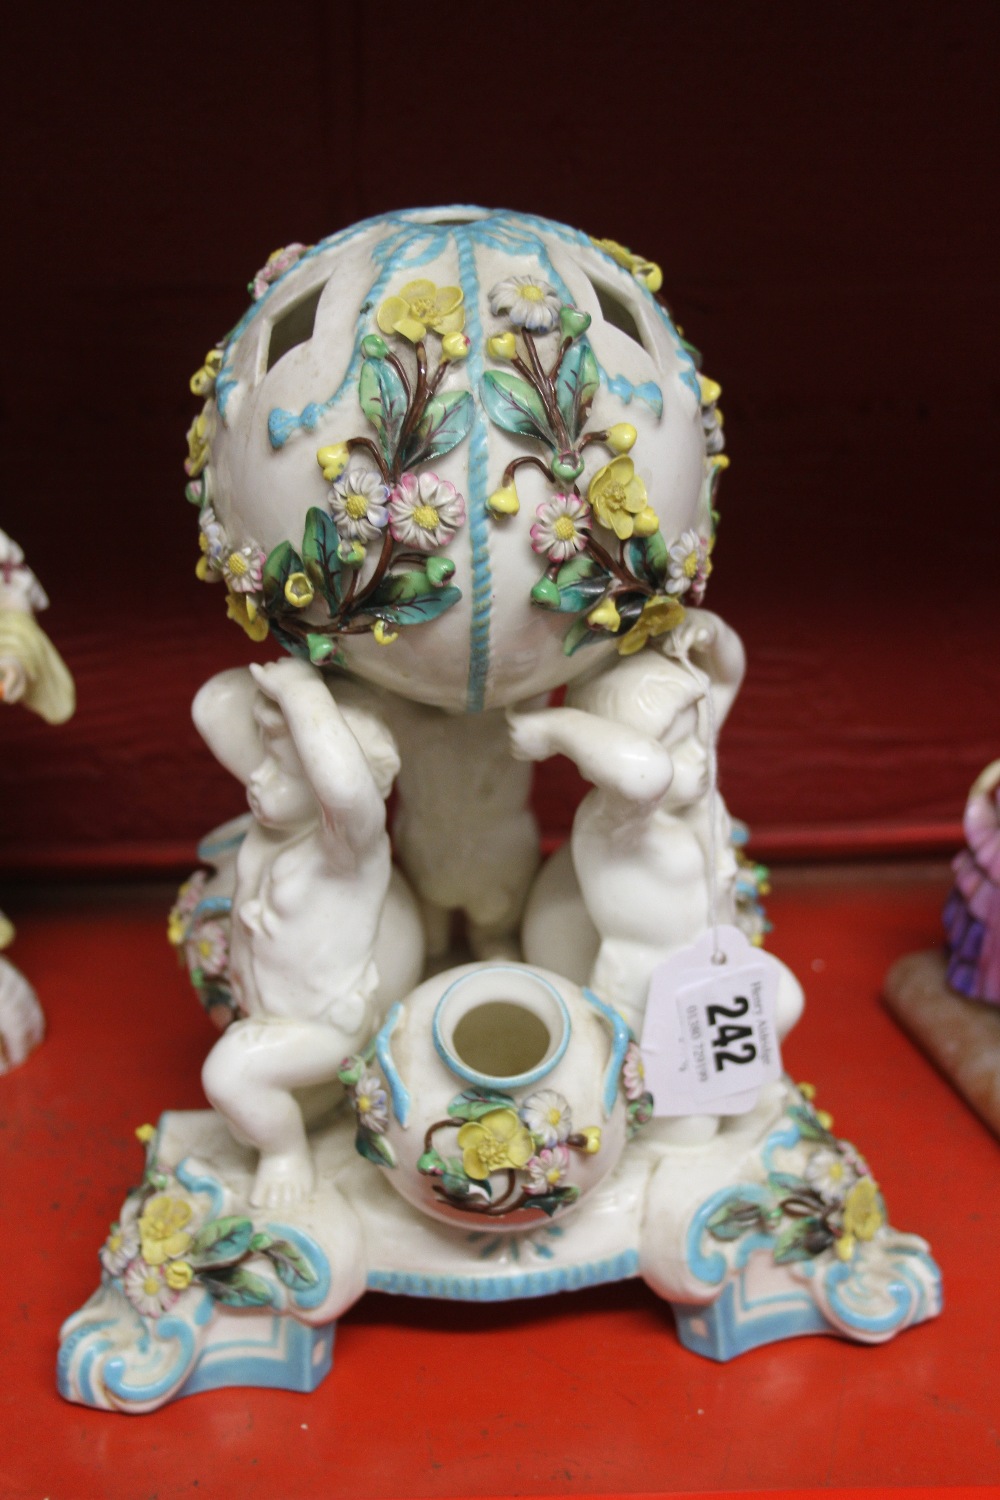 19th cent. Ceramics: Table centre piece possibly Minton, in the form of four cherubs supporting a